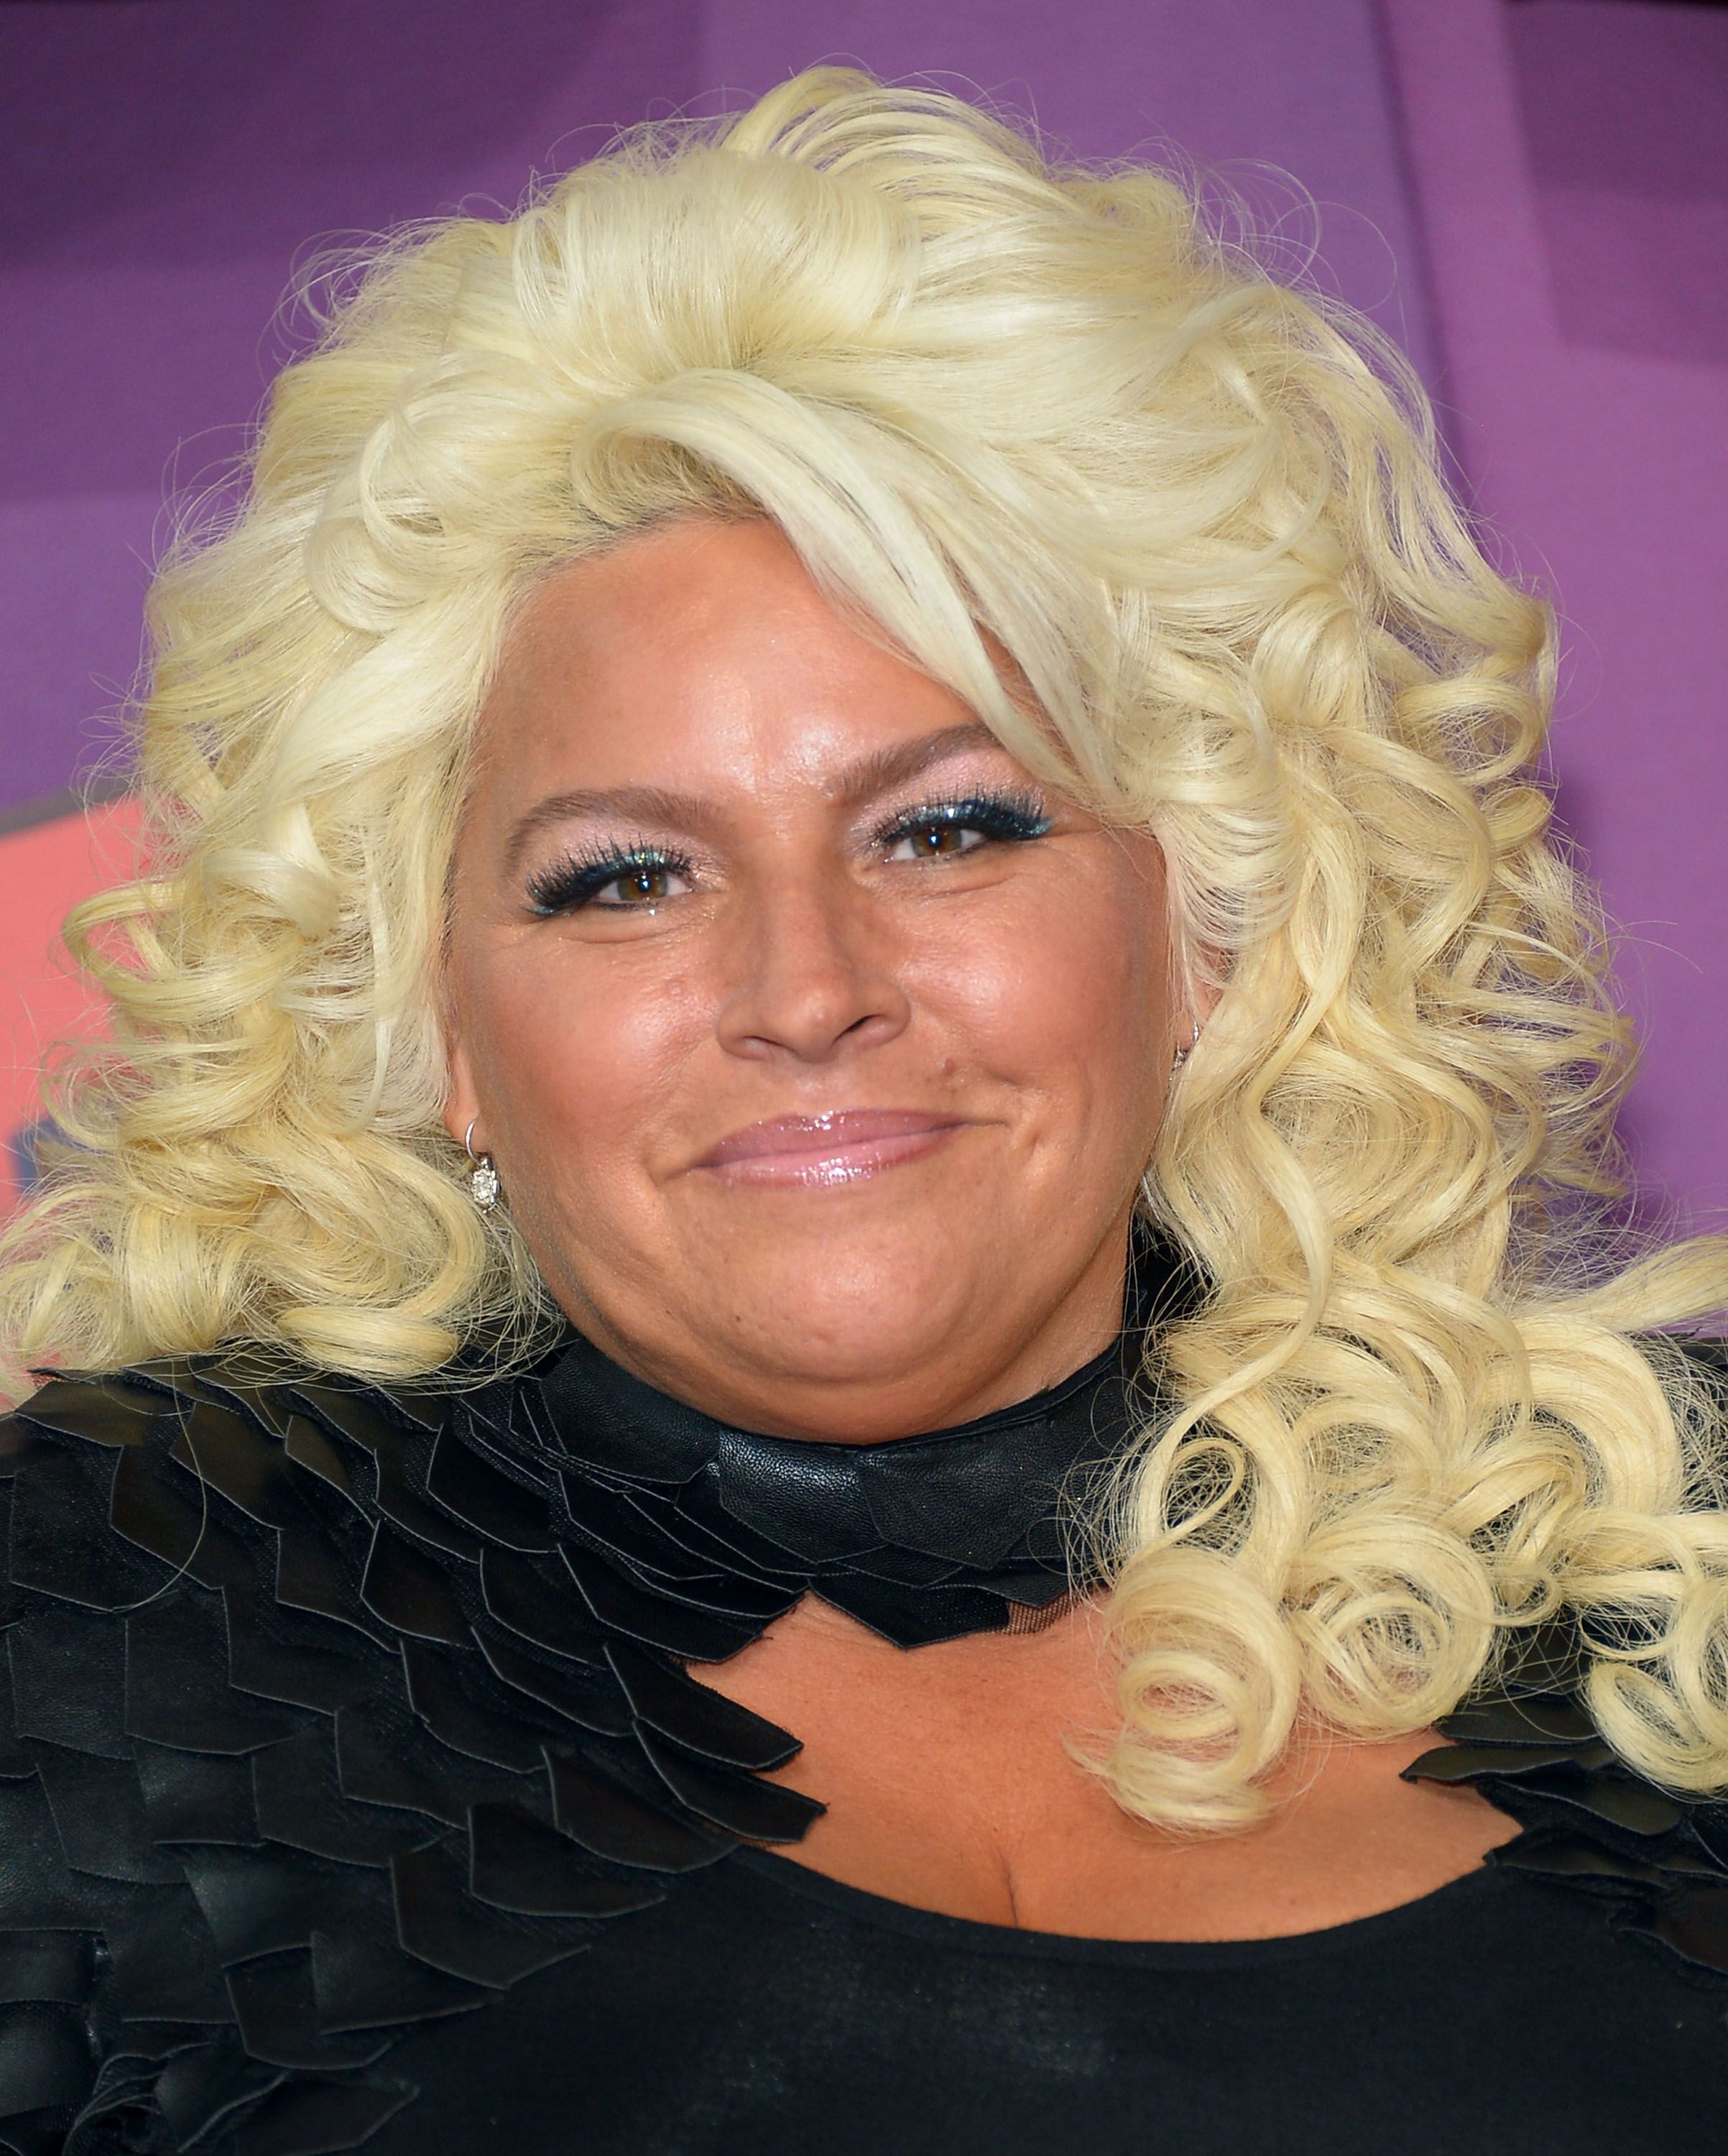 Beth Chapman at the CMT Music awards in 2014 in Nashville, Tennessee | Source: Getty Images